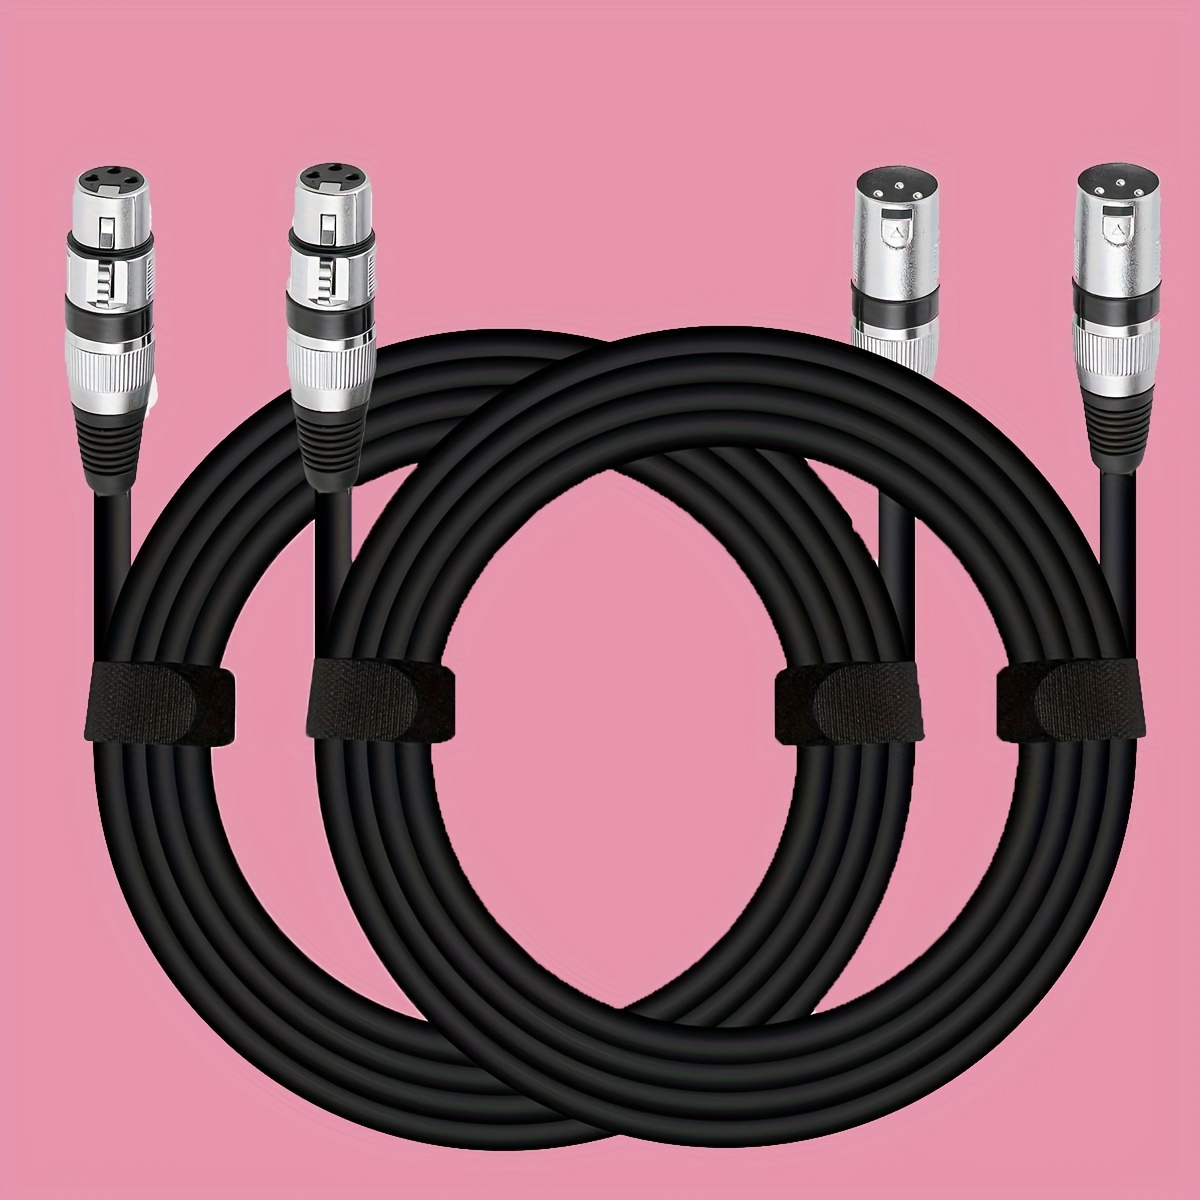 XLR Cables 3ft/1M 2 Packs, Premium Heavy Duty Balanced Microphone Cable  with 3-Pin XLR Male to Female Microphone Cord Connector Compatible with